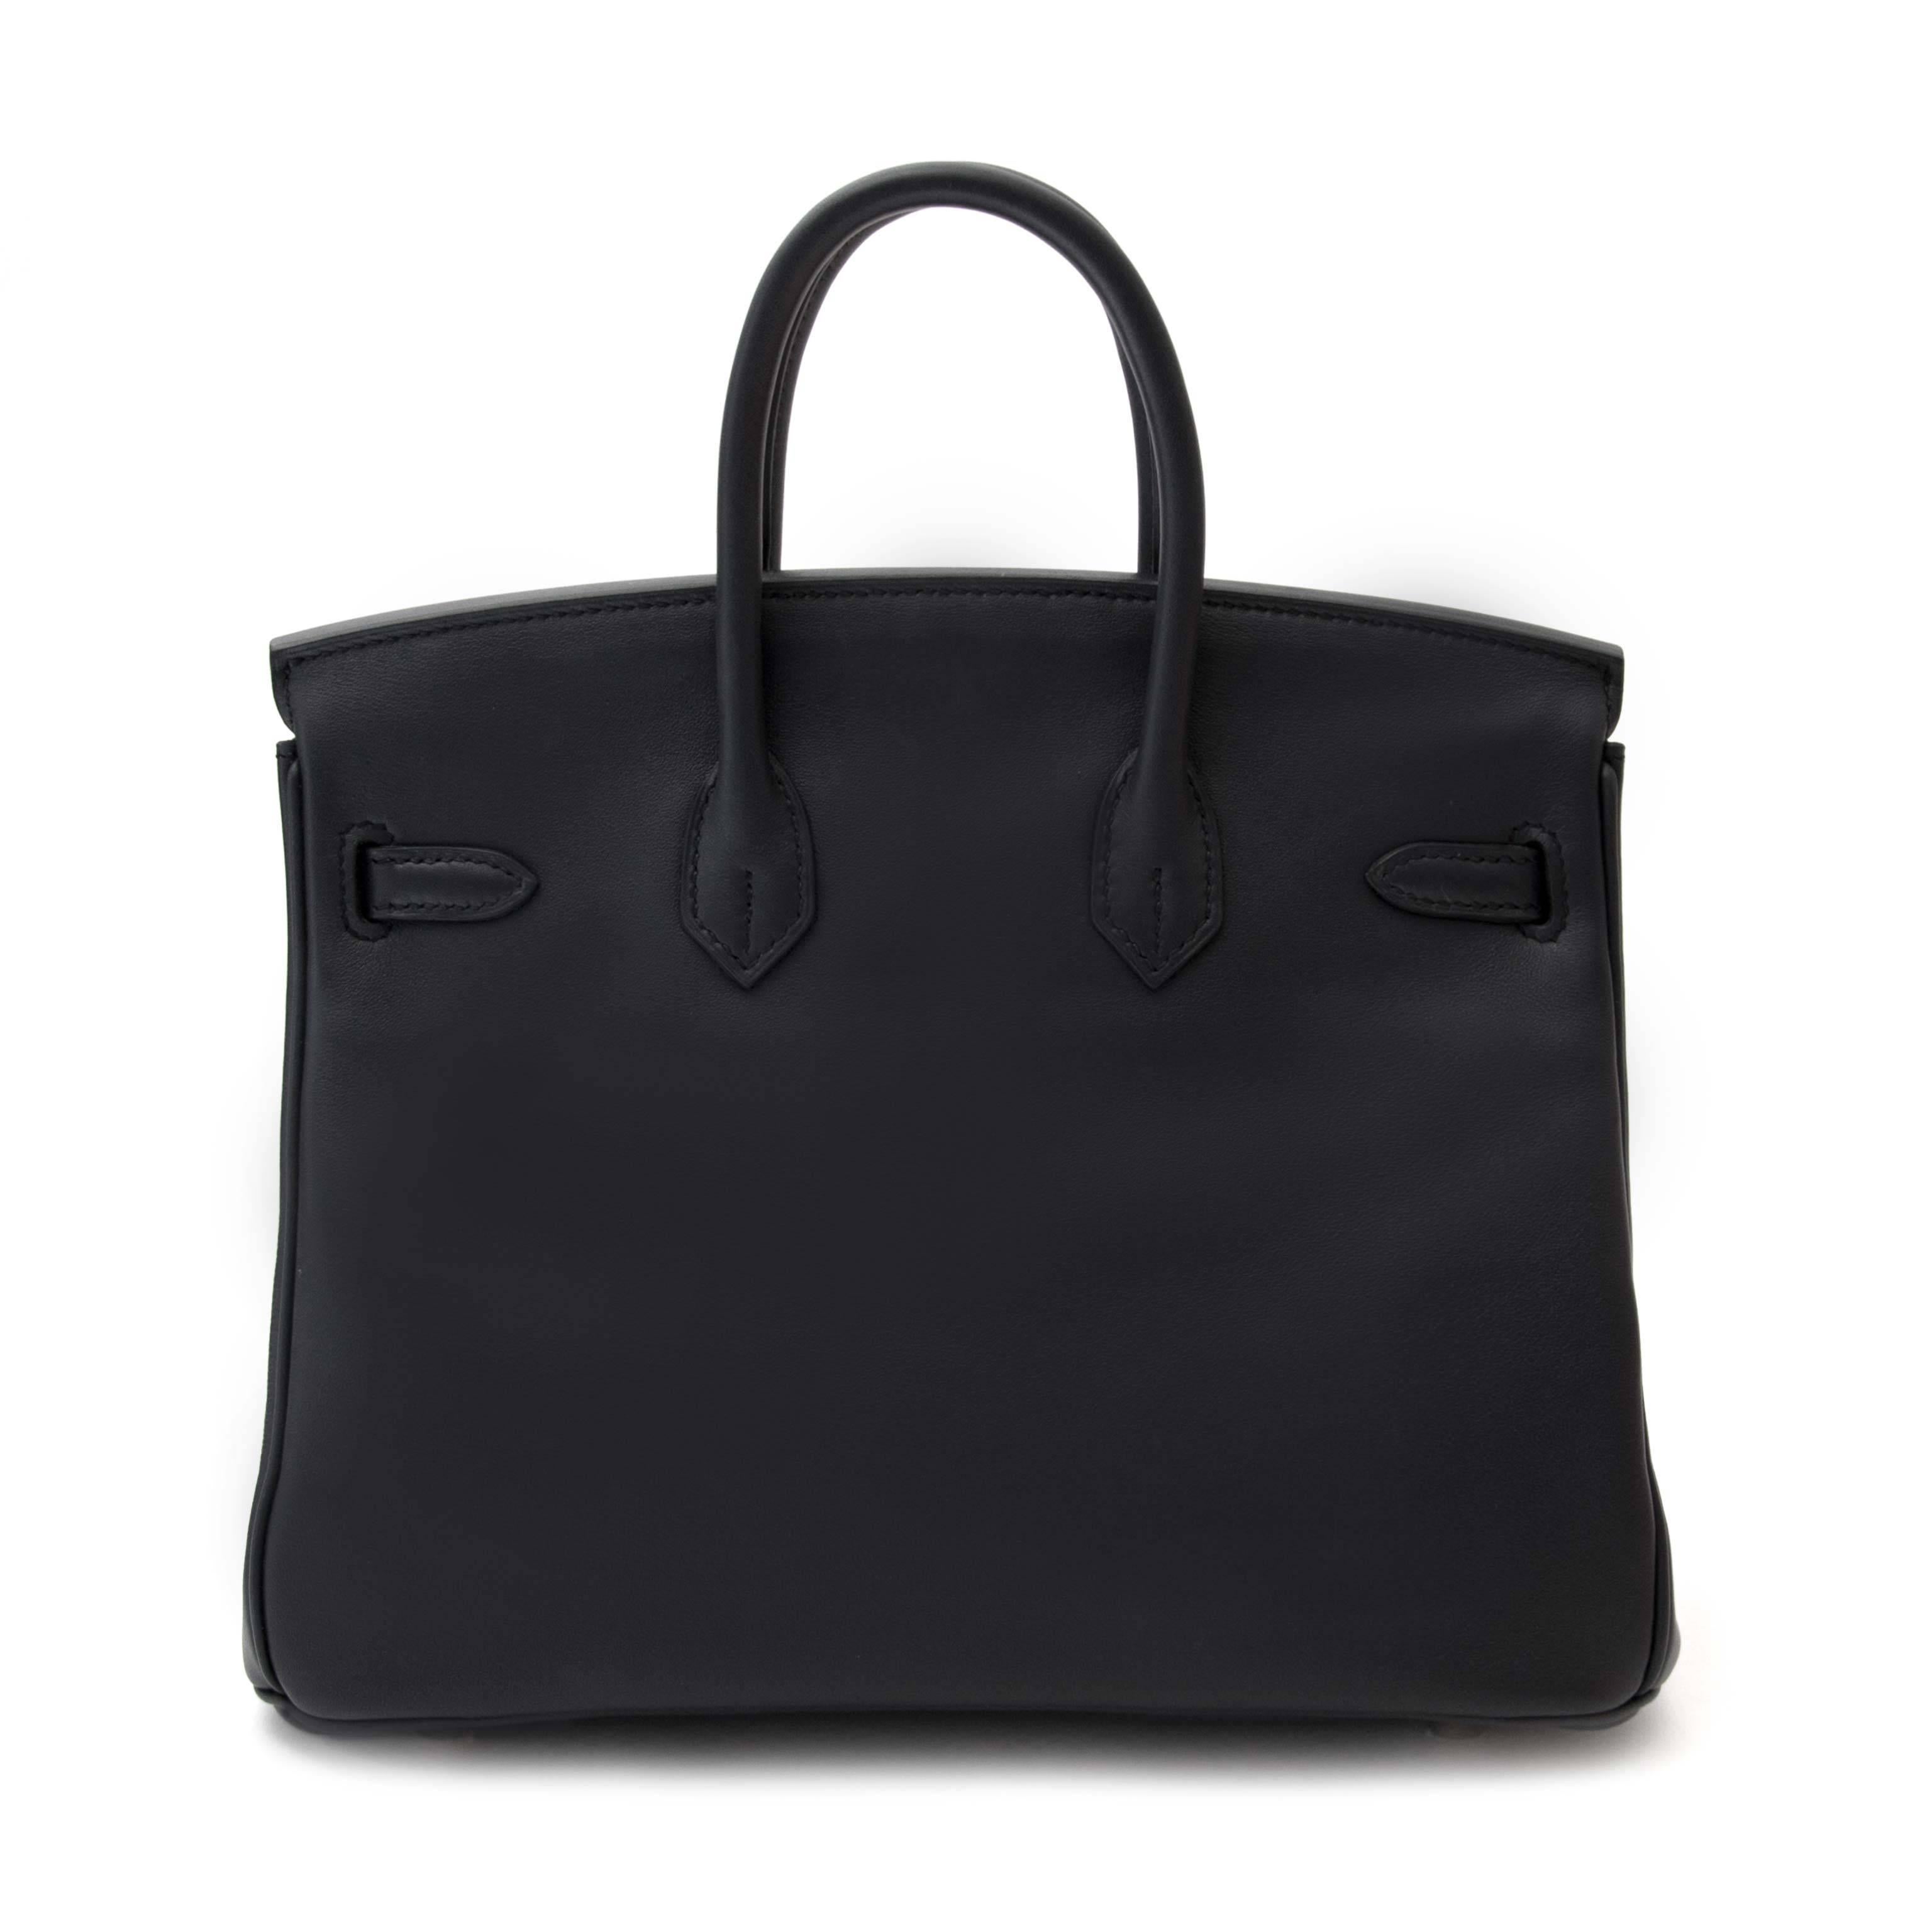 As New 

Hermès Birkin 25 Swift PHW

Skip the waitinglist and get this amazing Birkin right now!

This as new Birkin bag and comes in beautiful timeless Blue Nuit , it looks even more saturated because of its fine grained swift leather, which is